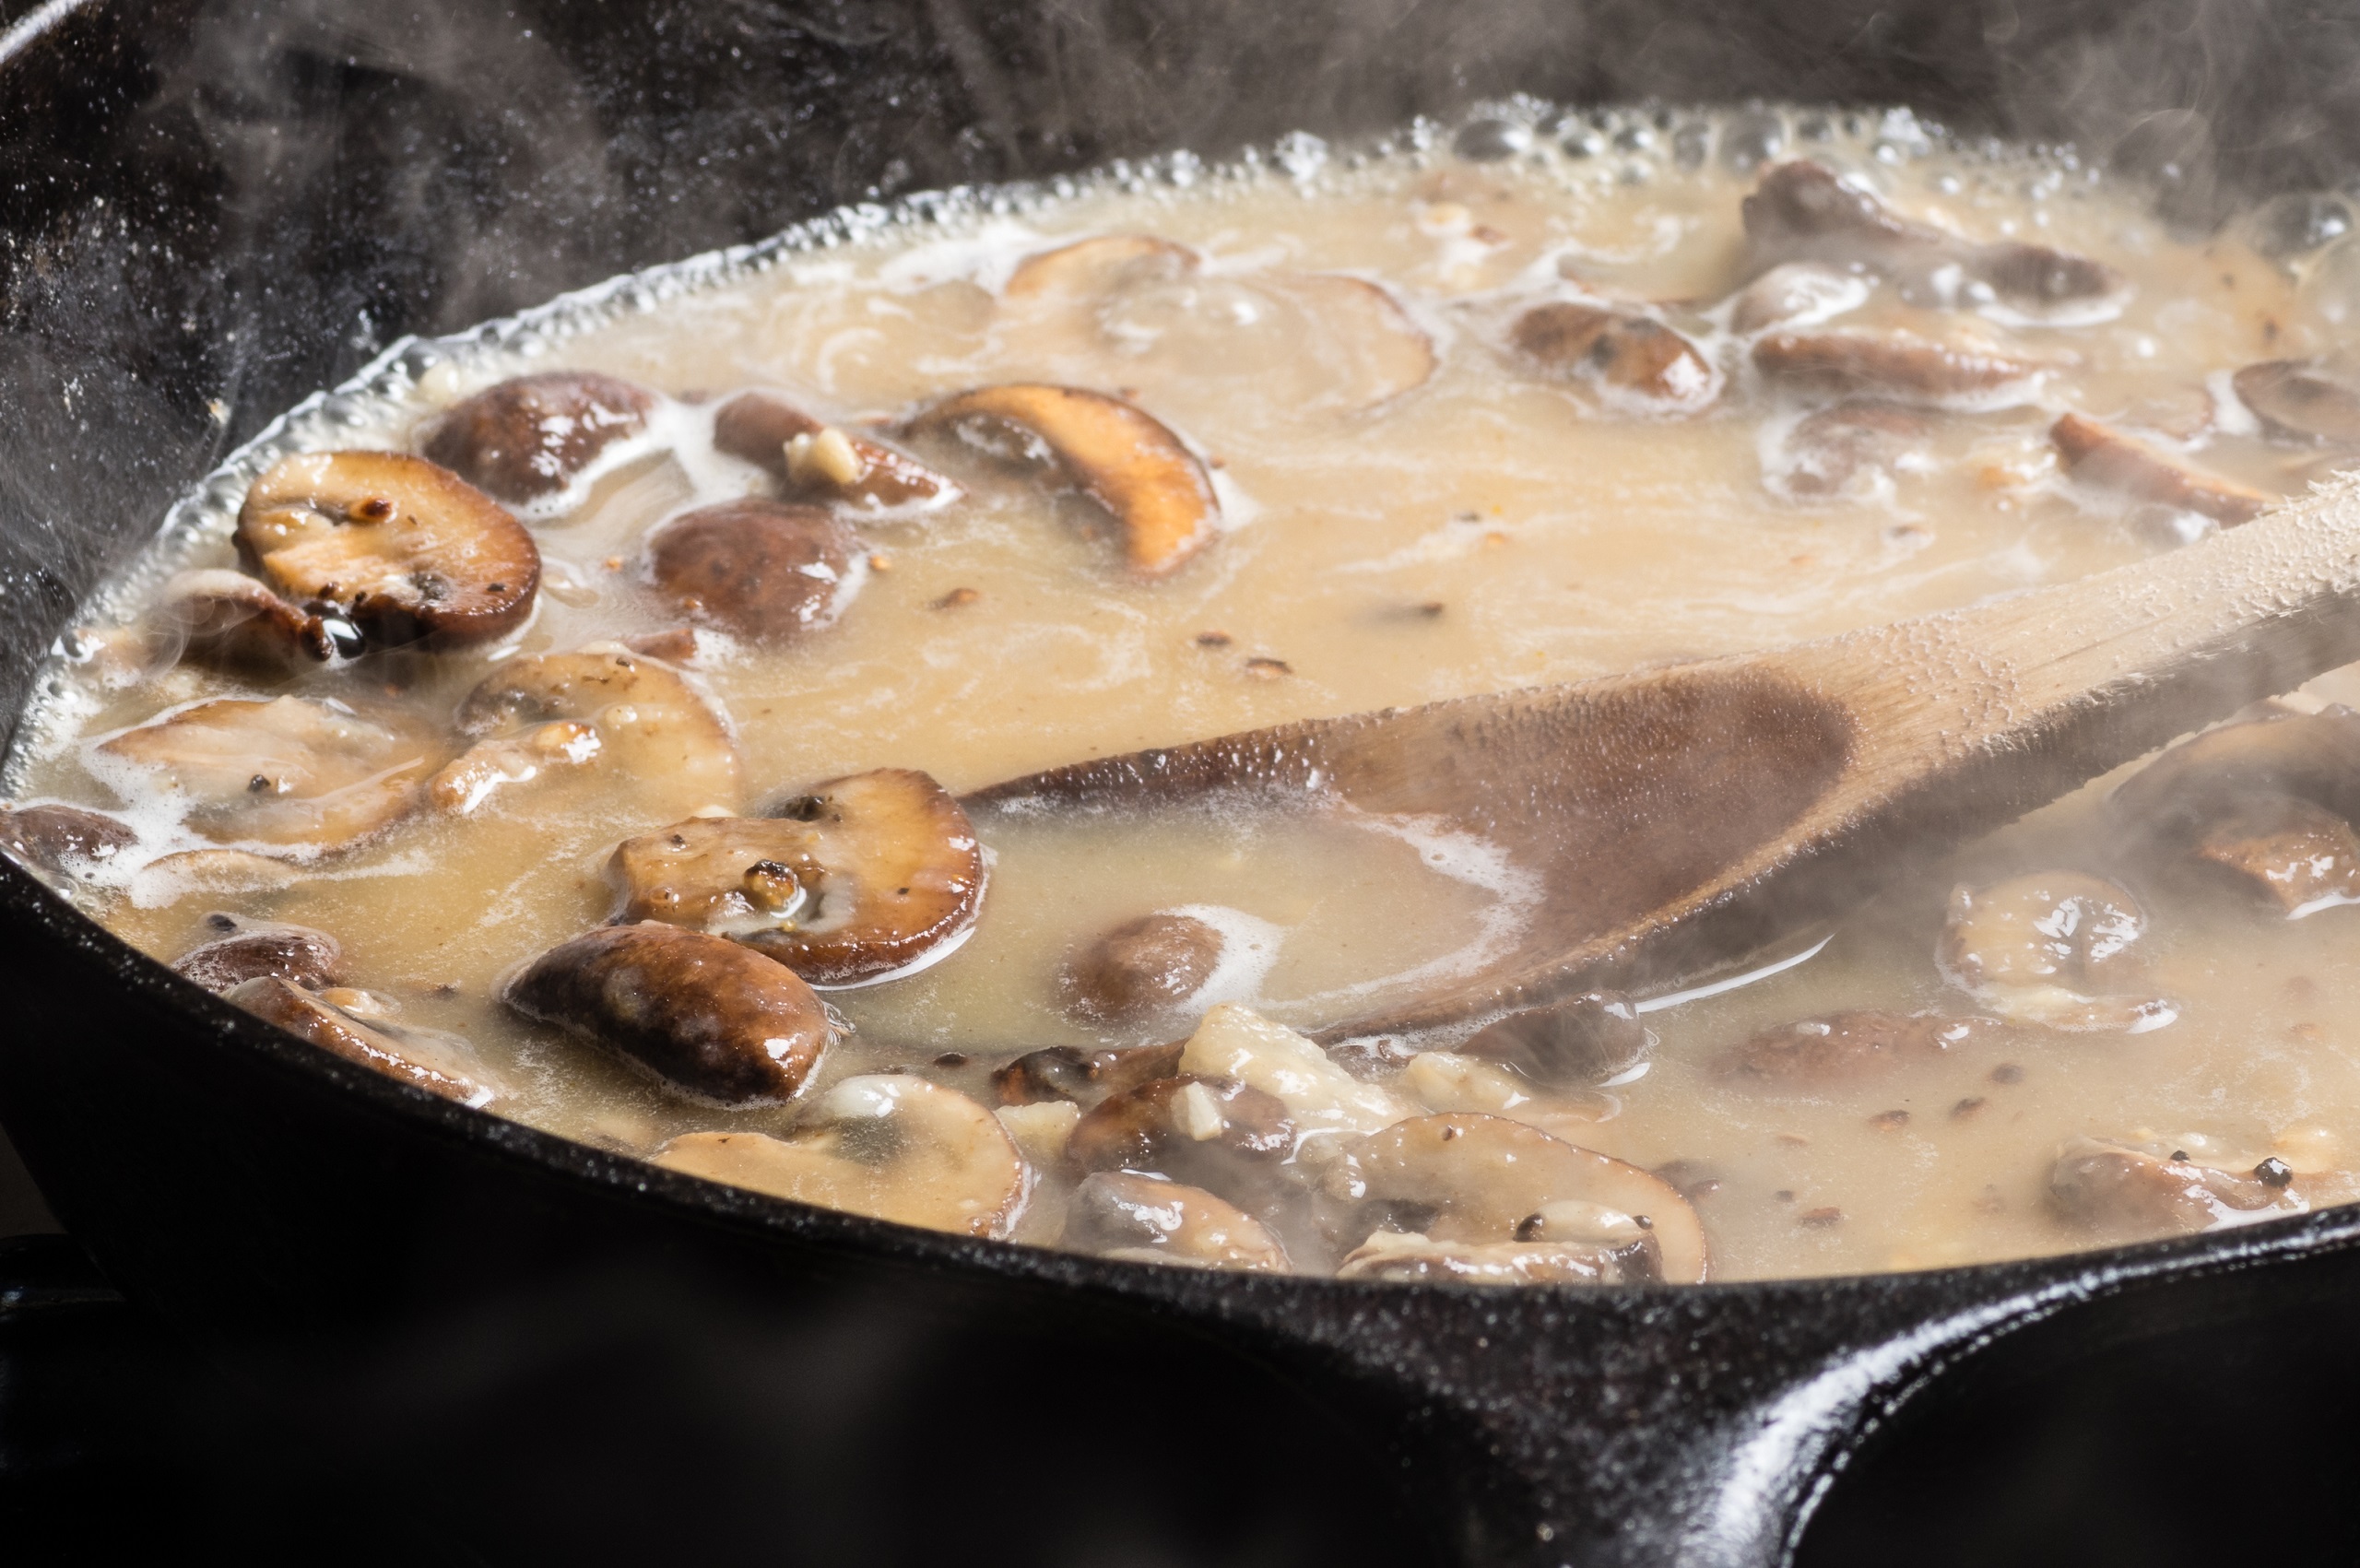 Hot simmering mushroom gravy or rue still in the iron skillet with a big wooden spoon as if to pour the sauce.